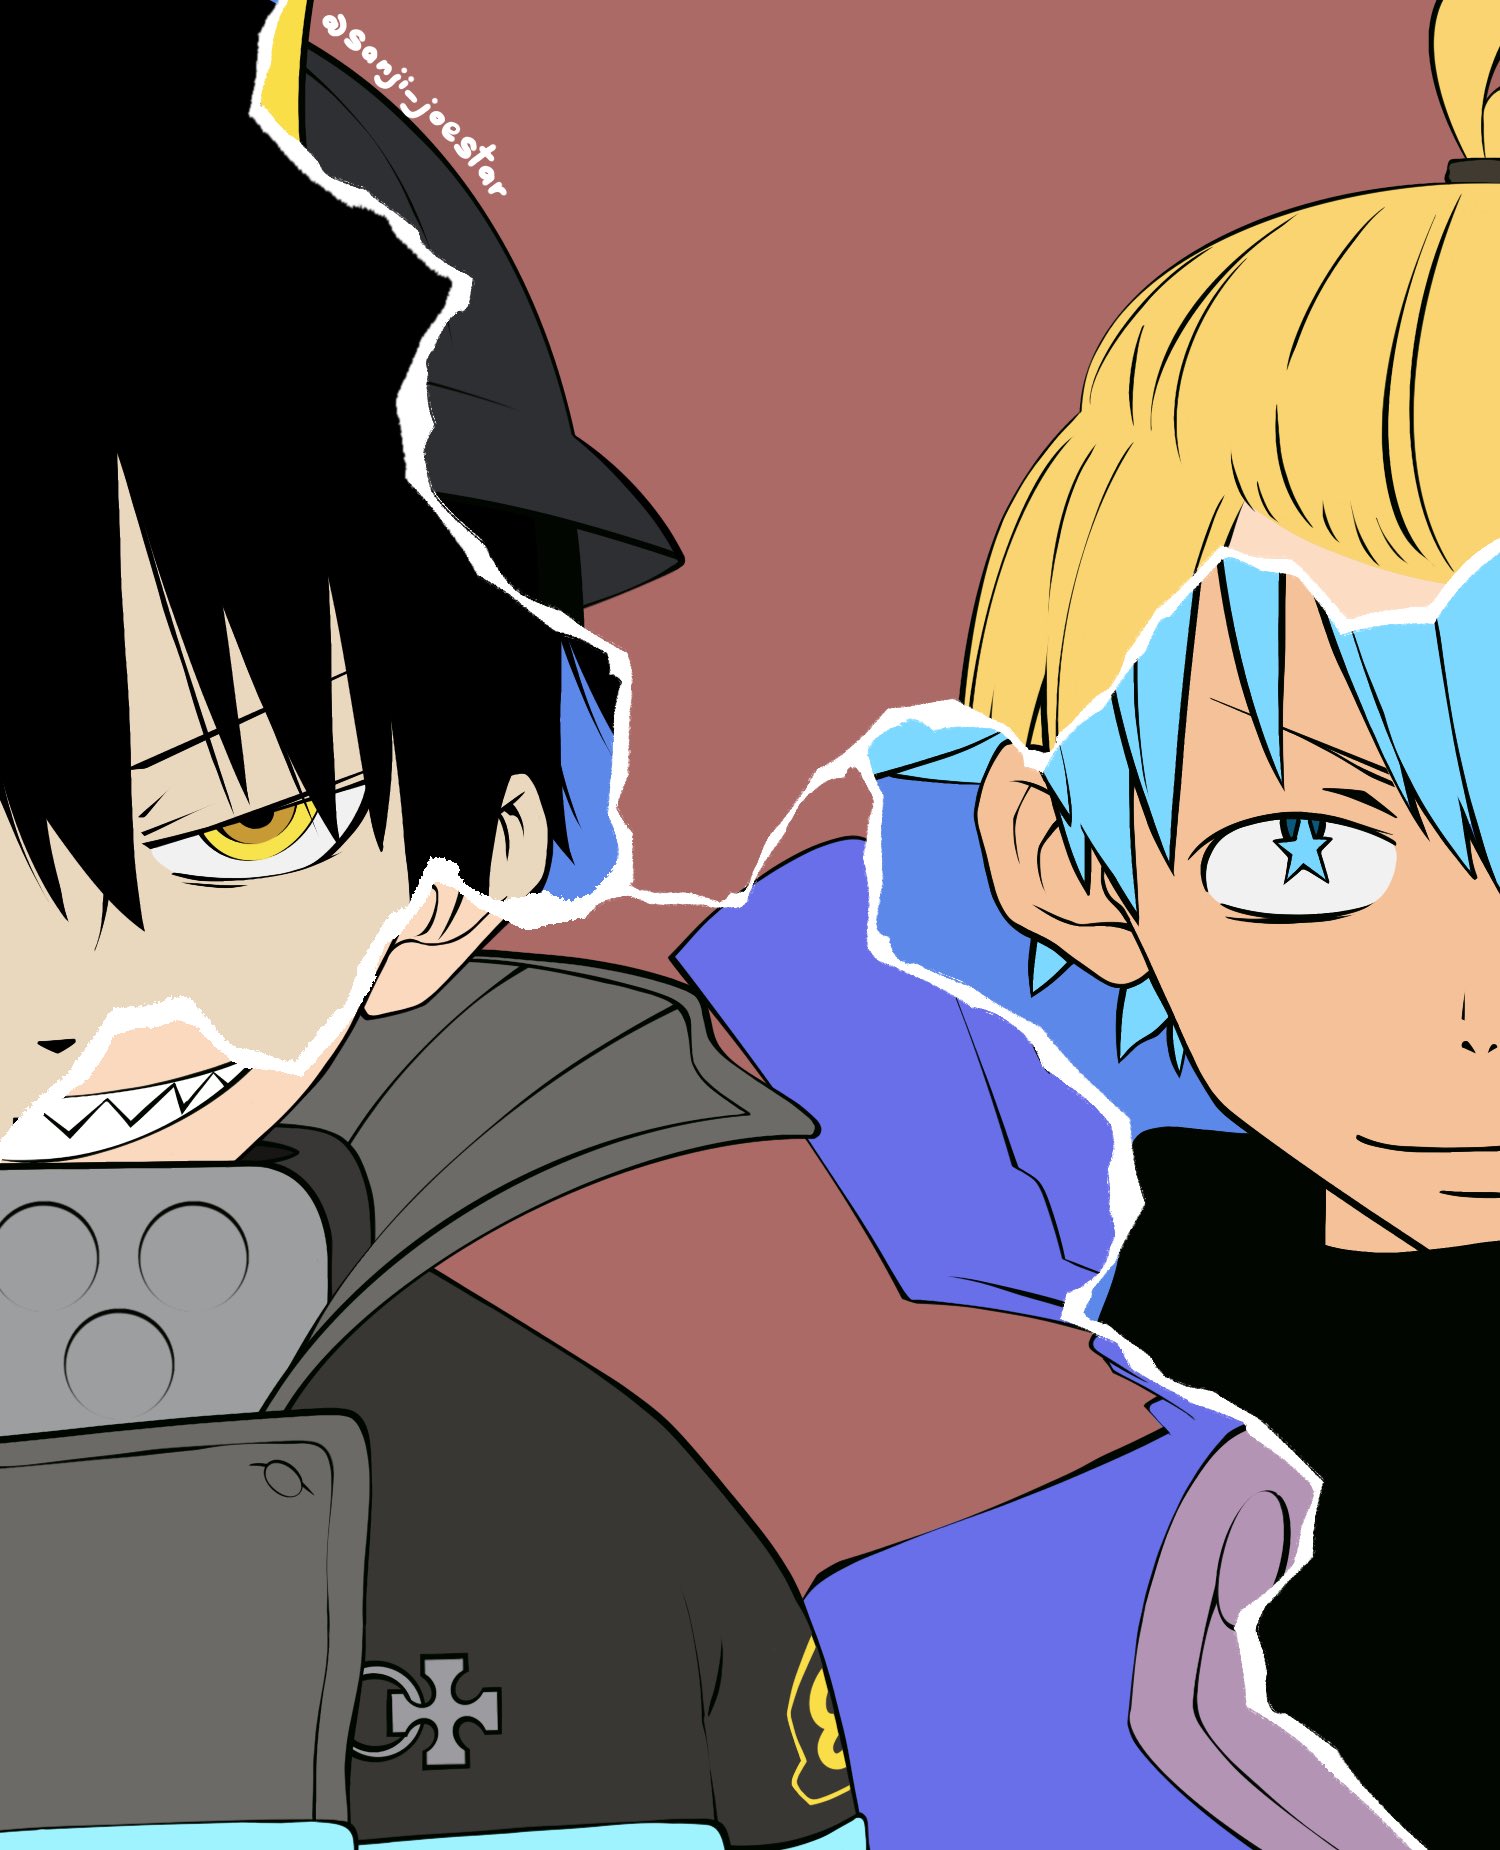 Daily Soul Eater+Fire Force Stuff on X: Another Fire Force x Soul Eater  Art Work! #souleater #fireforce #art  / X